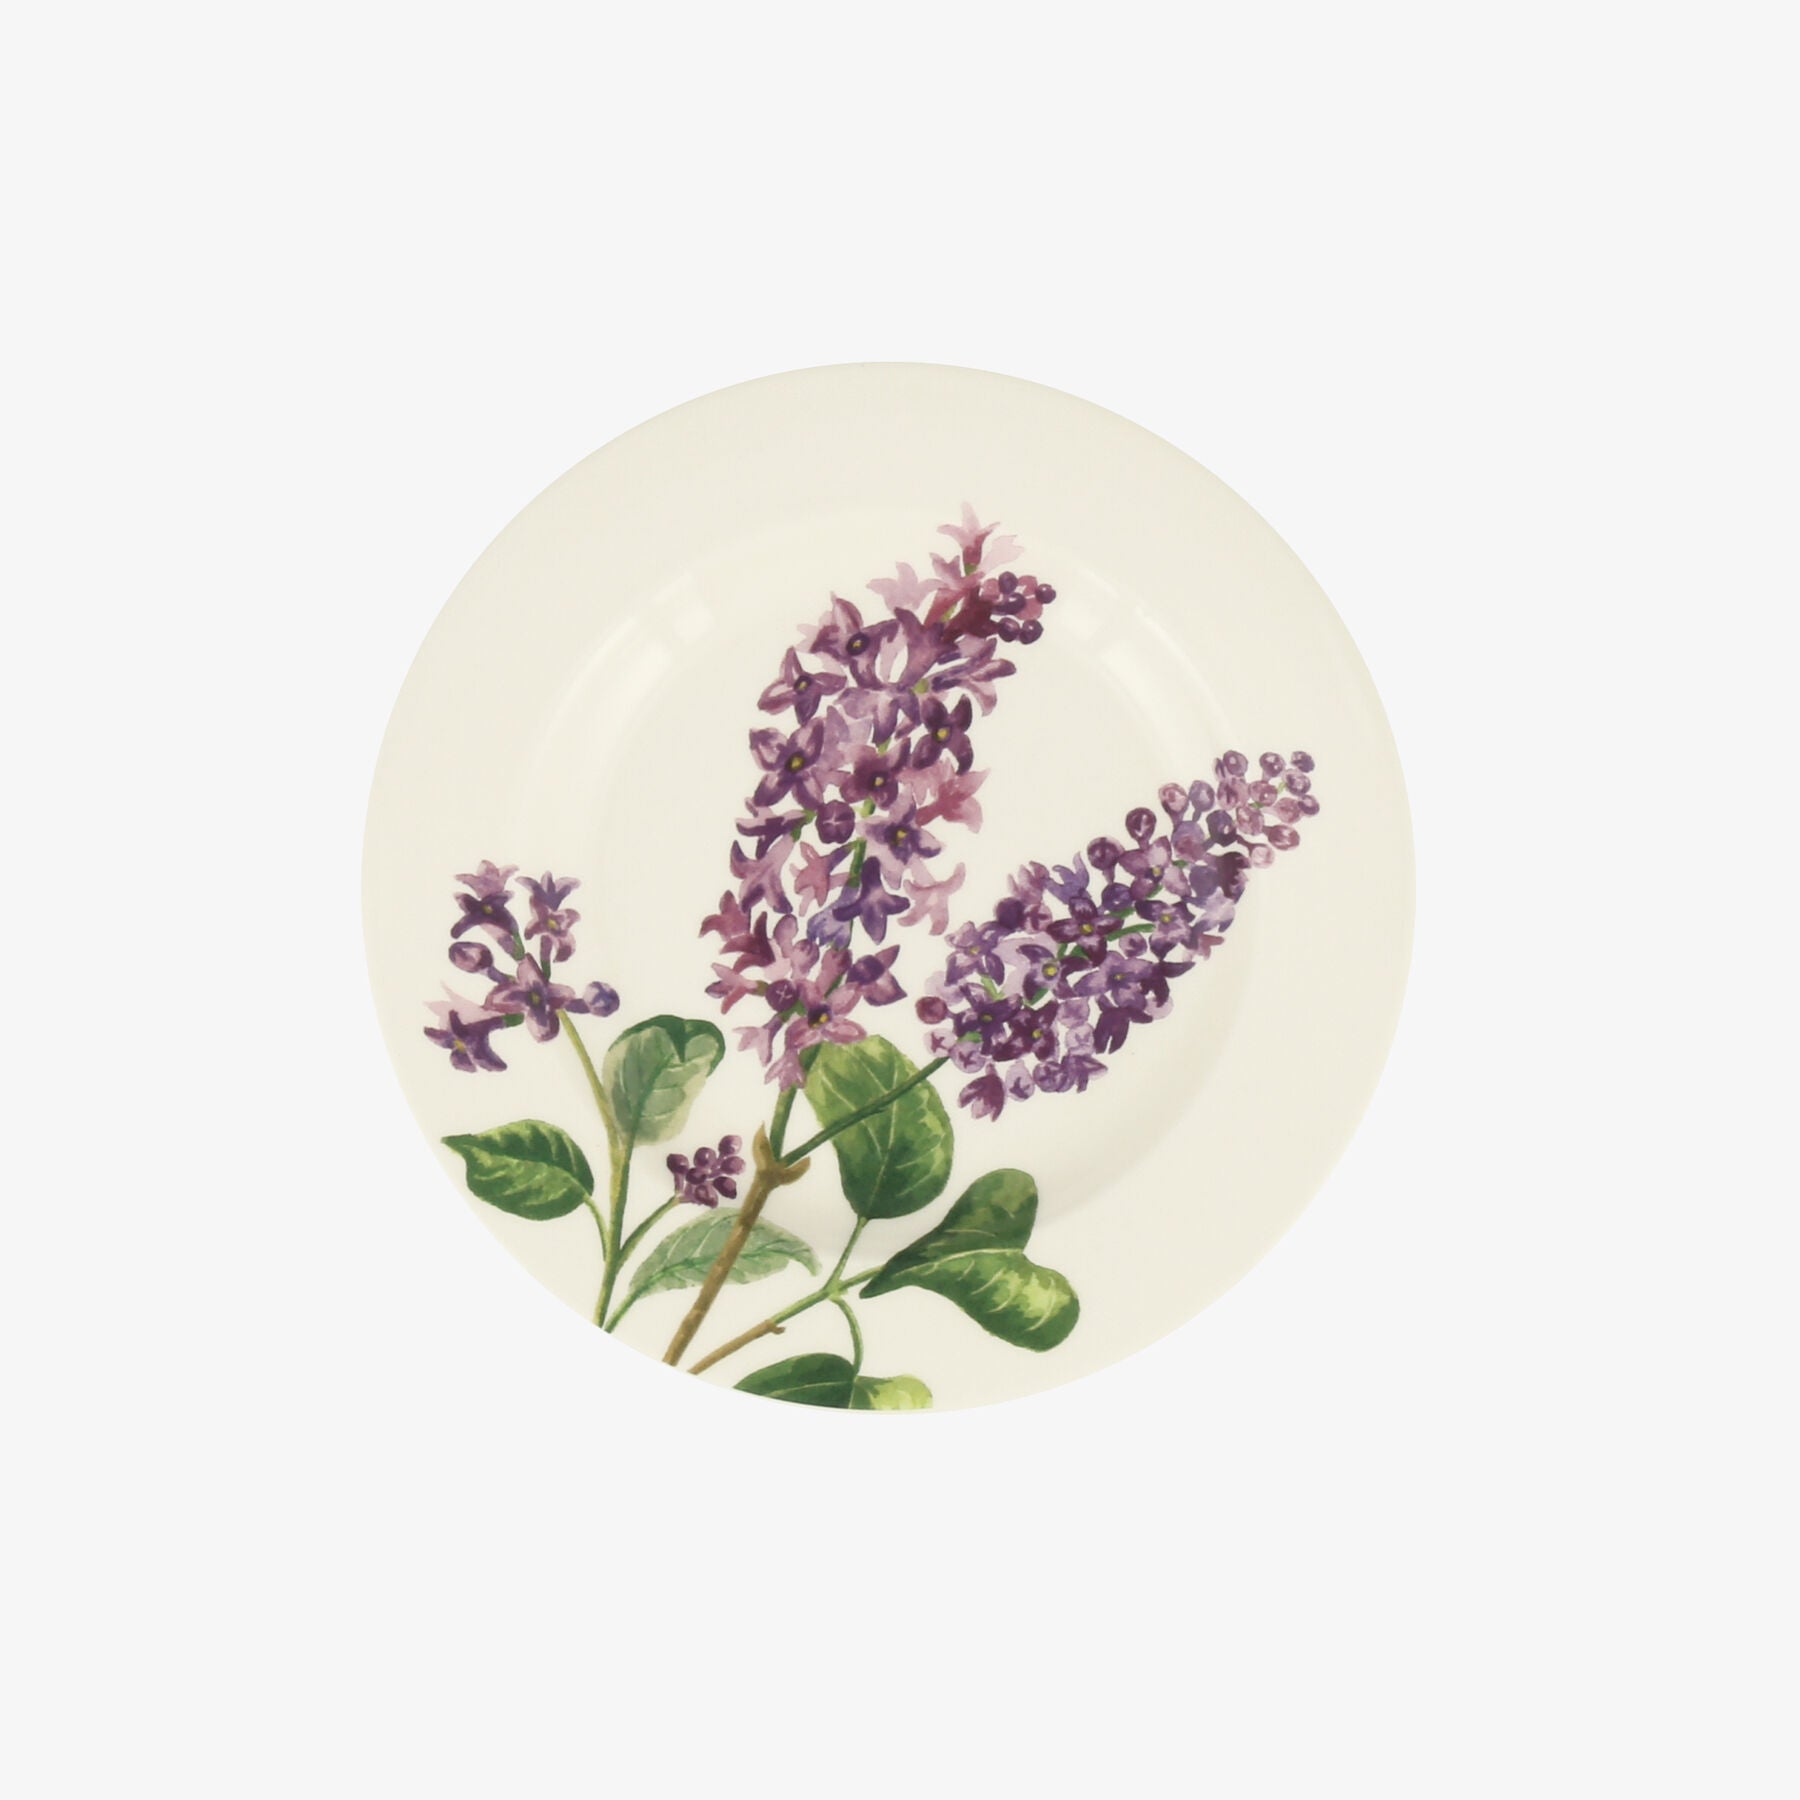 Lilac 6 1/2 Inch Plate - Unique Handmade & Handpainted English Earthenware British-Made Pottery Plat